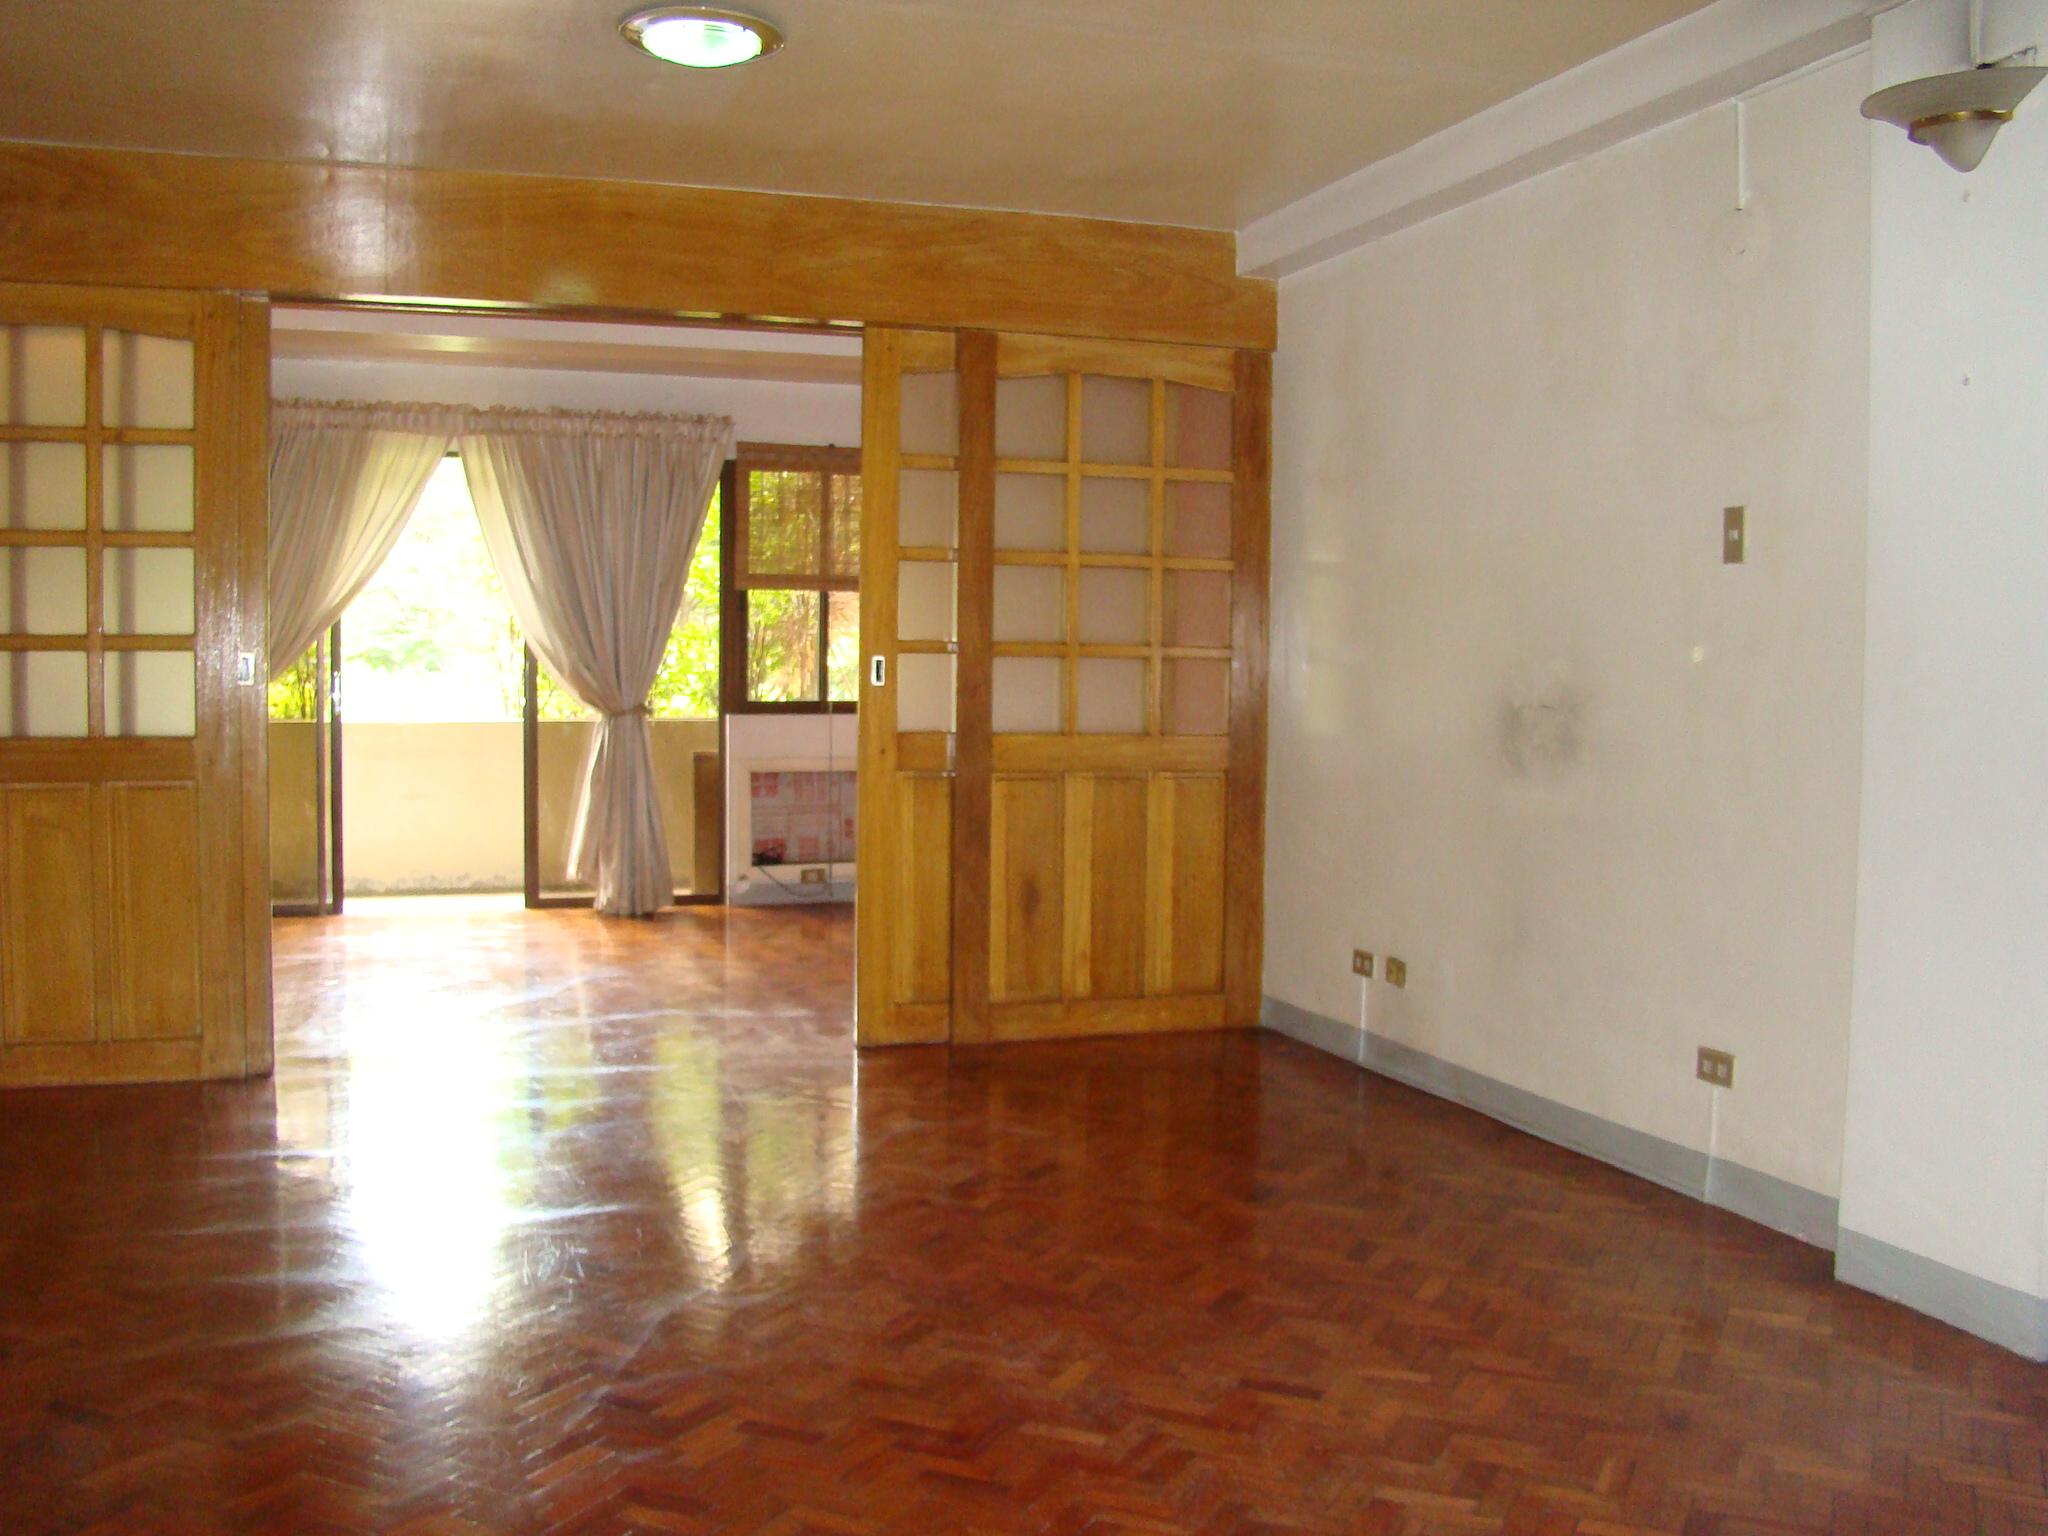 CHATEAU VERDE, VALLE VERDE I PASIG, 79SQM, FURNISHED, 1BR, WIFI, BALCONY, PARKING